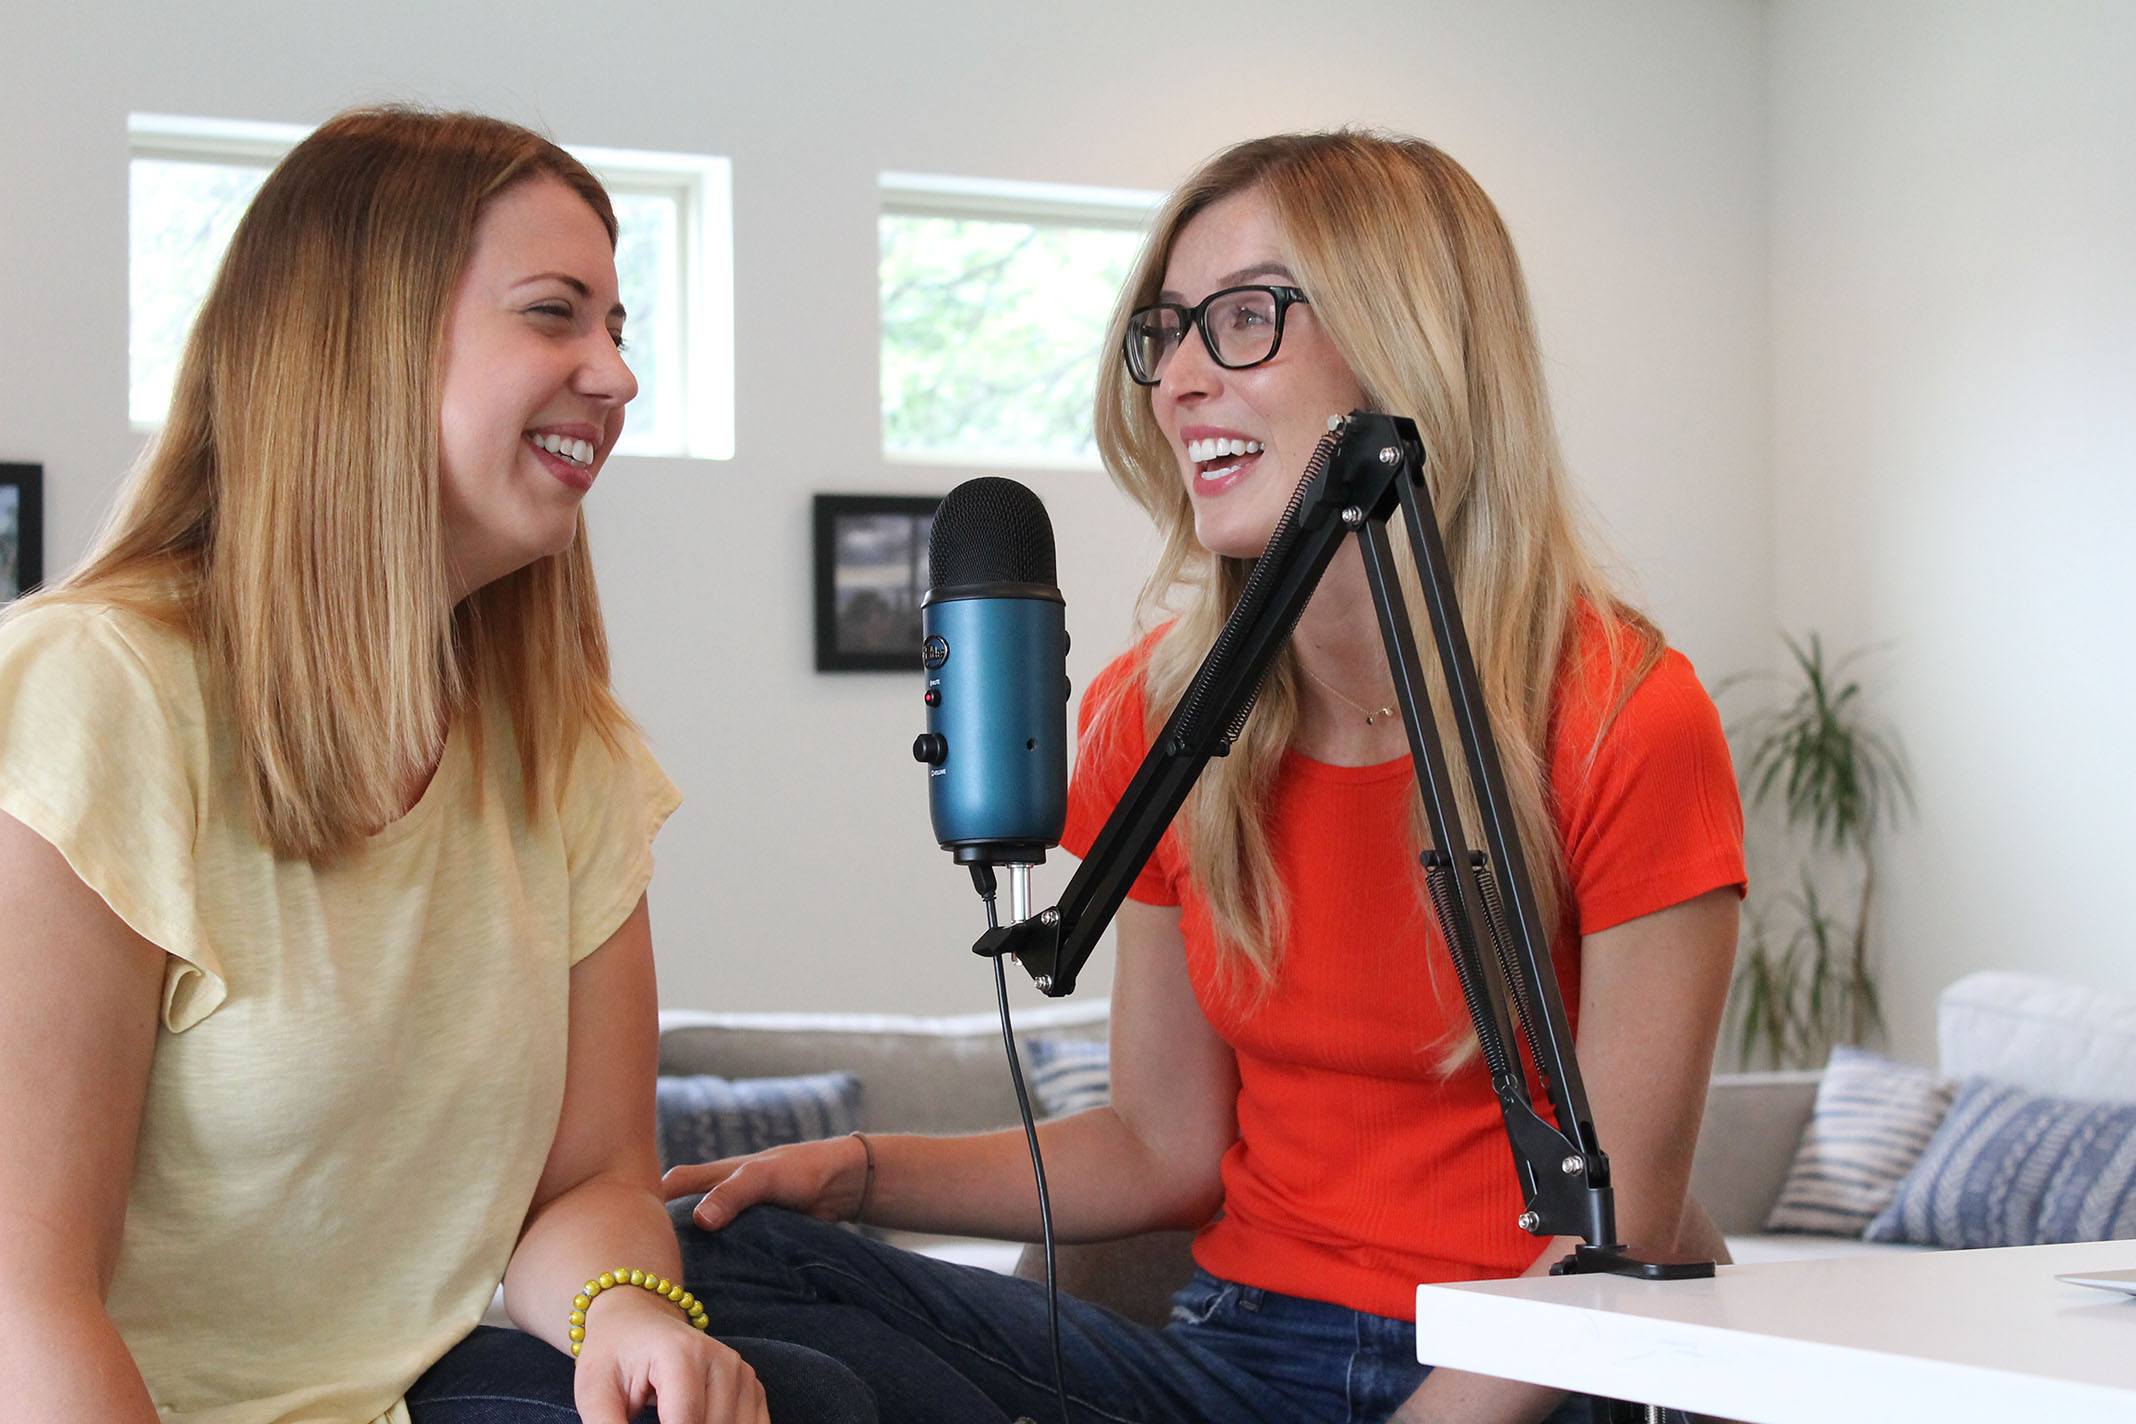 Dallas-area therapists Kristen Diou (left) and Anna Zapata (right) discuss how mental health is represented in the movie “Perks of Being a Wallflower” for their podcast, “Pop Culture Therapists.”